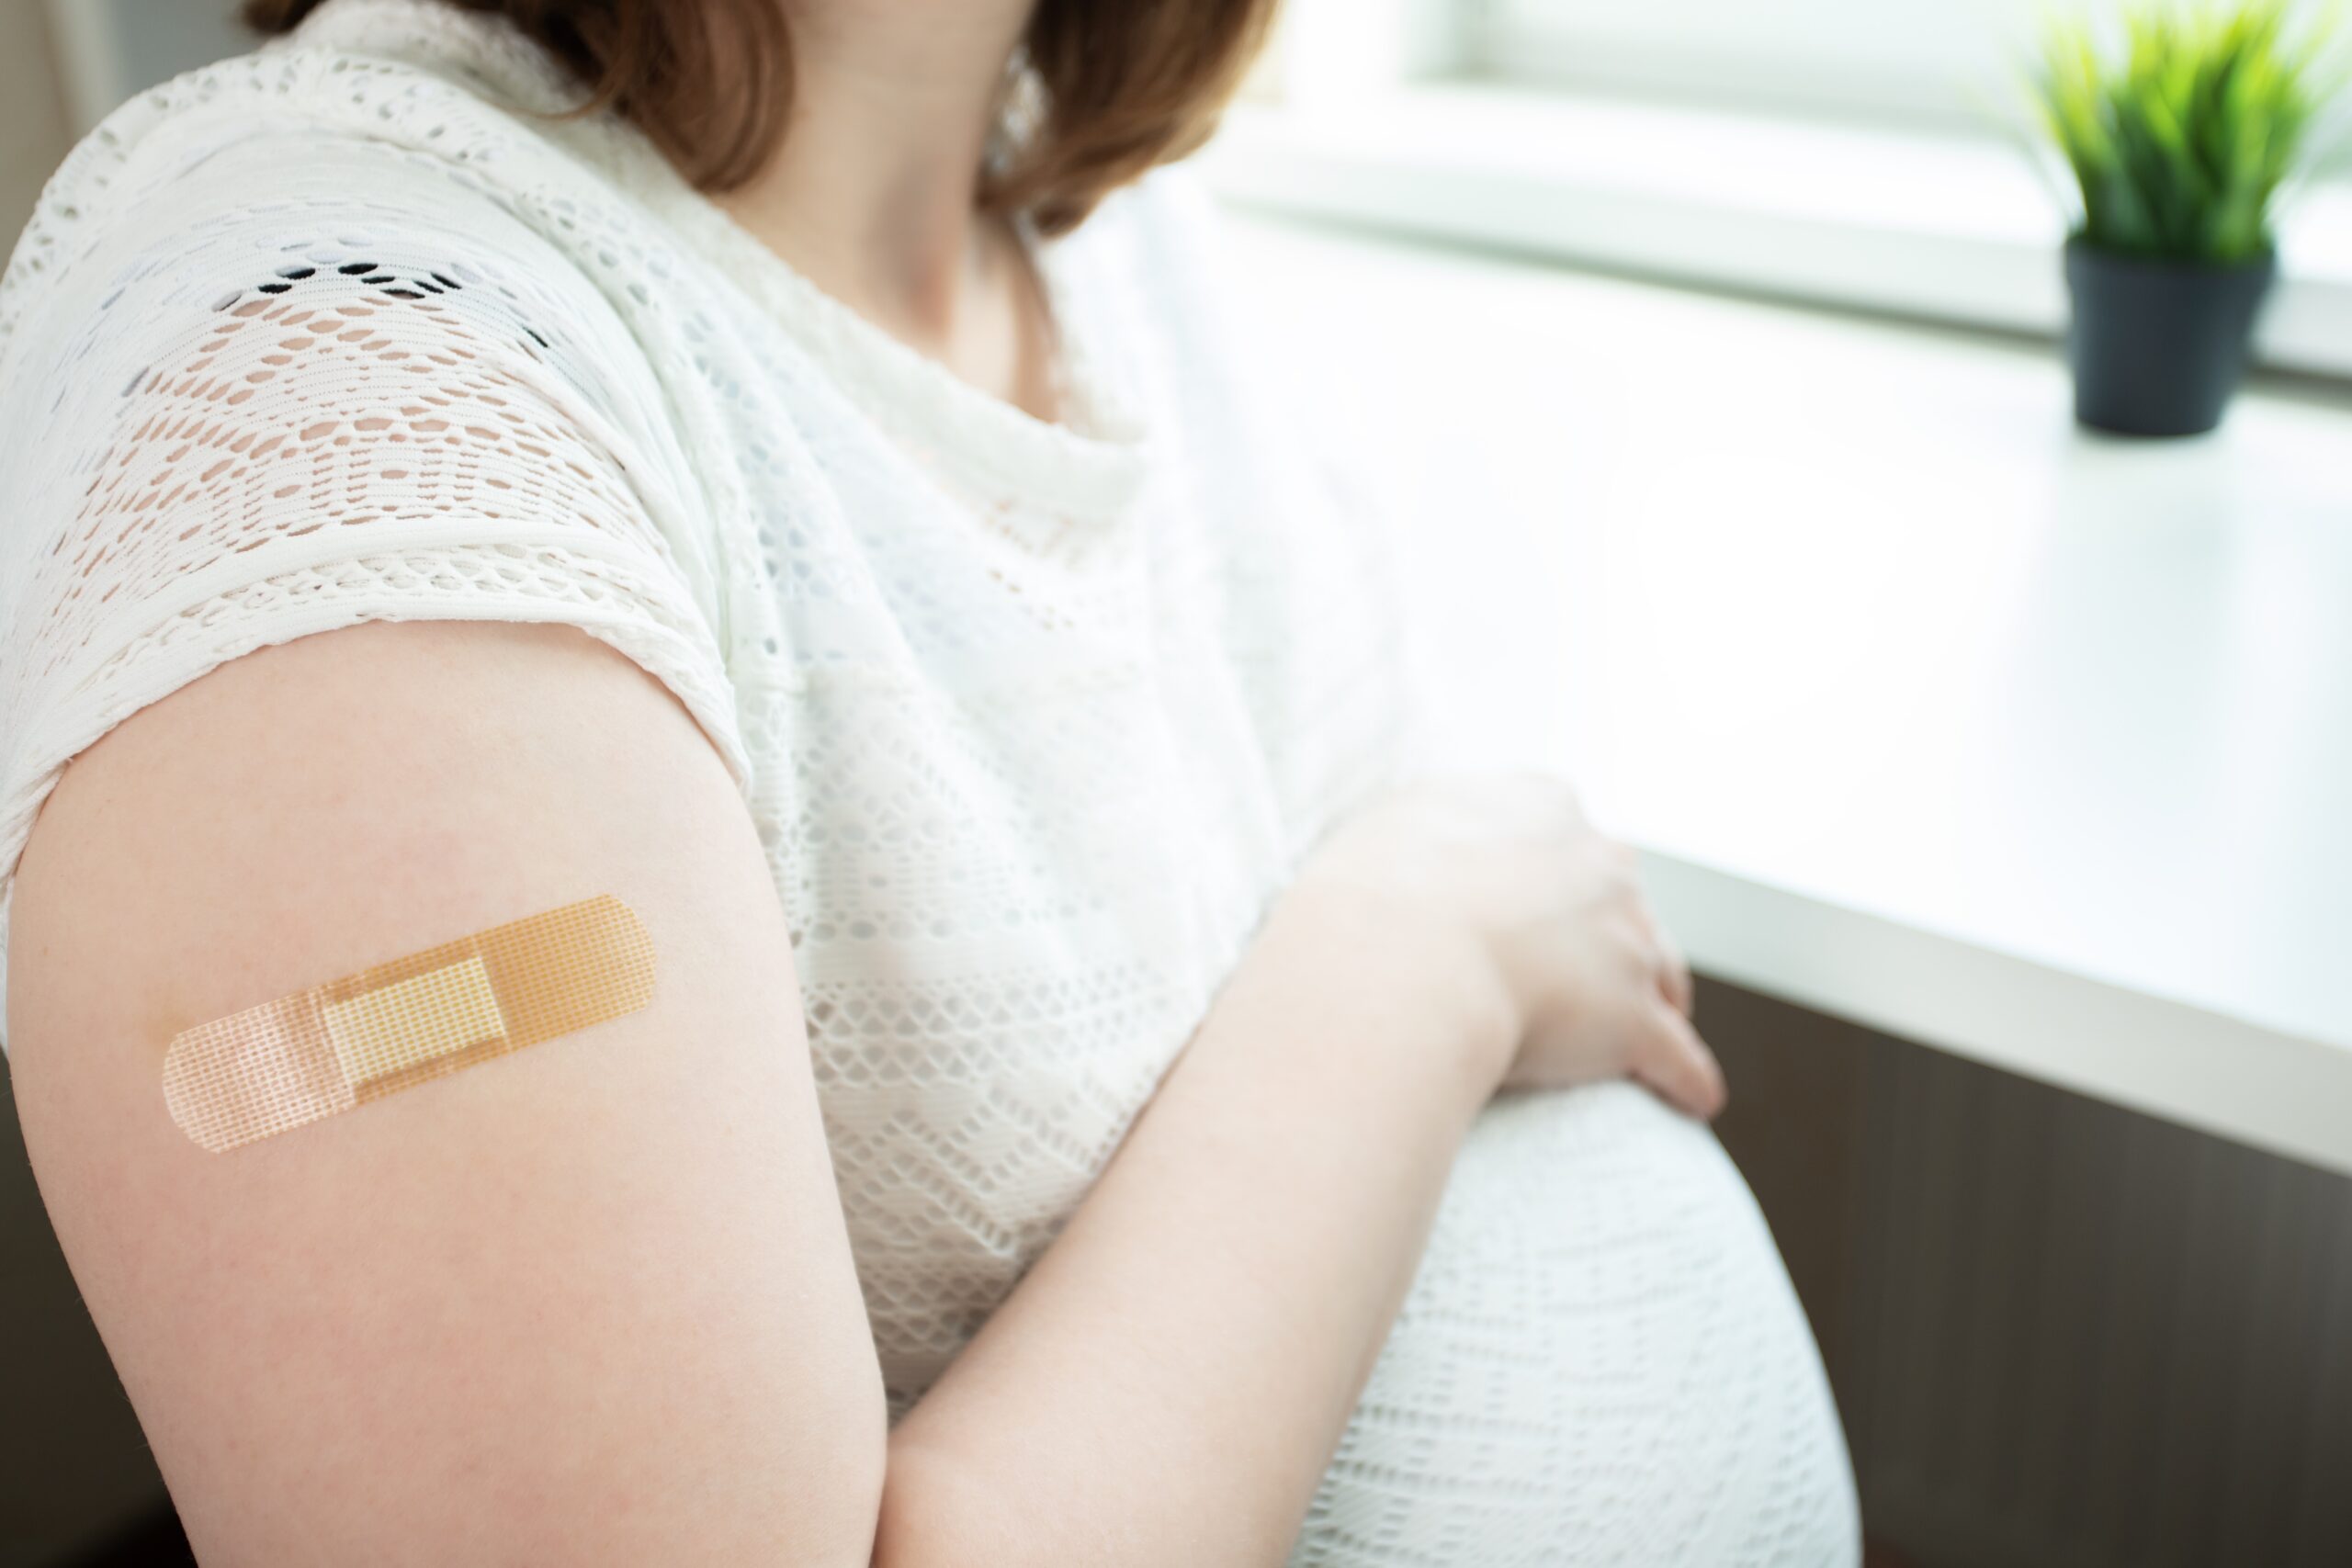 Pregnant woman after receiving a vaccine